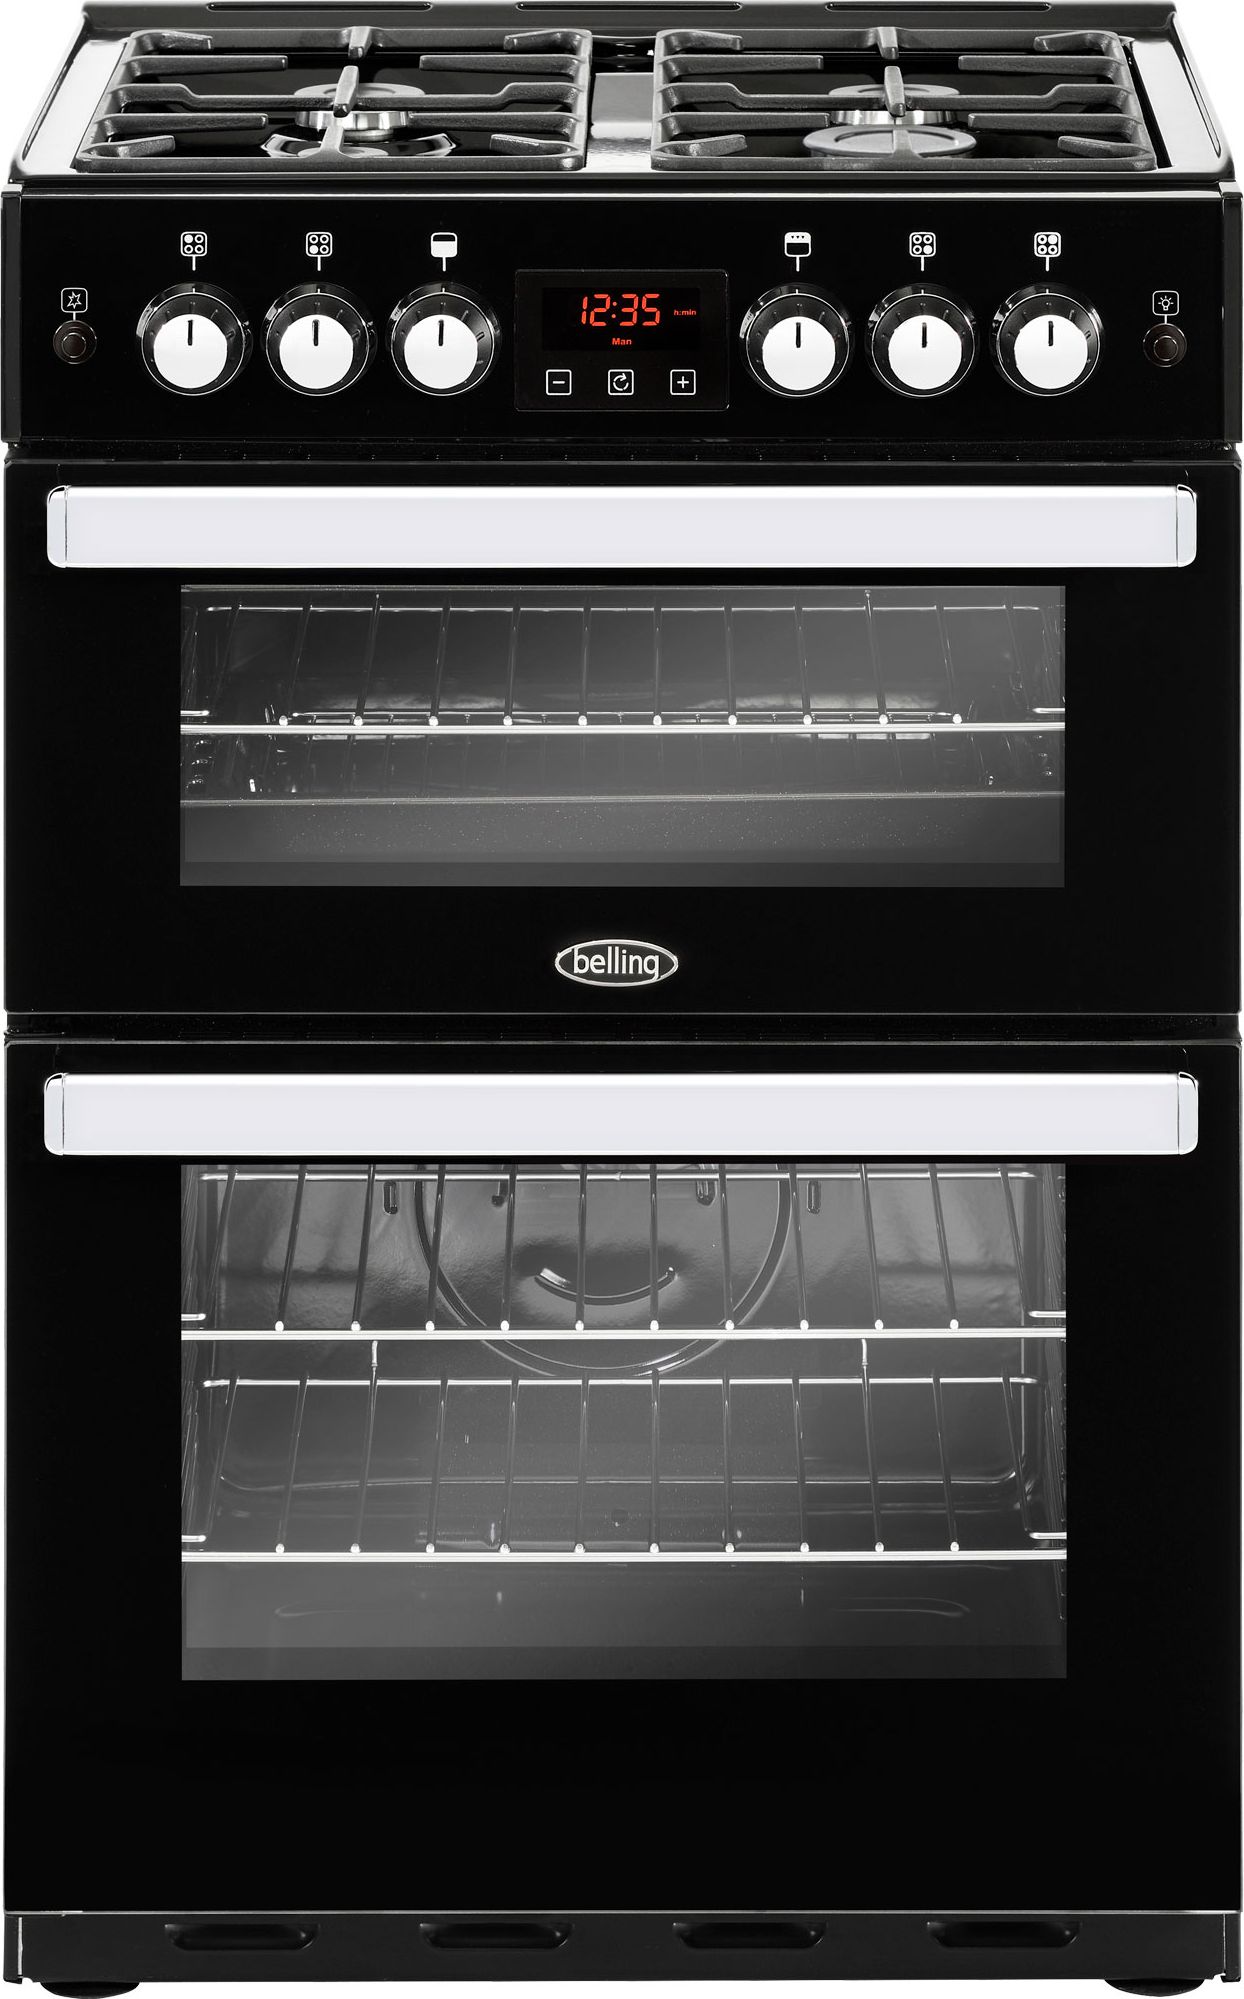 Belling Cookcentre 60G 60cm Freestanding Gas Cooker with Full Width Electric Grill - Black - A+/A Rated, Black